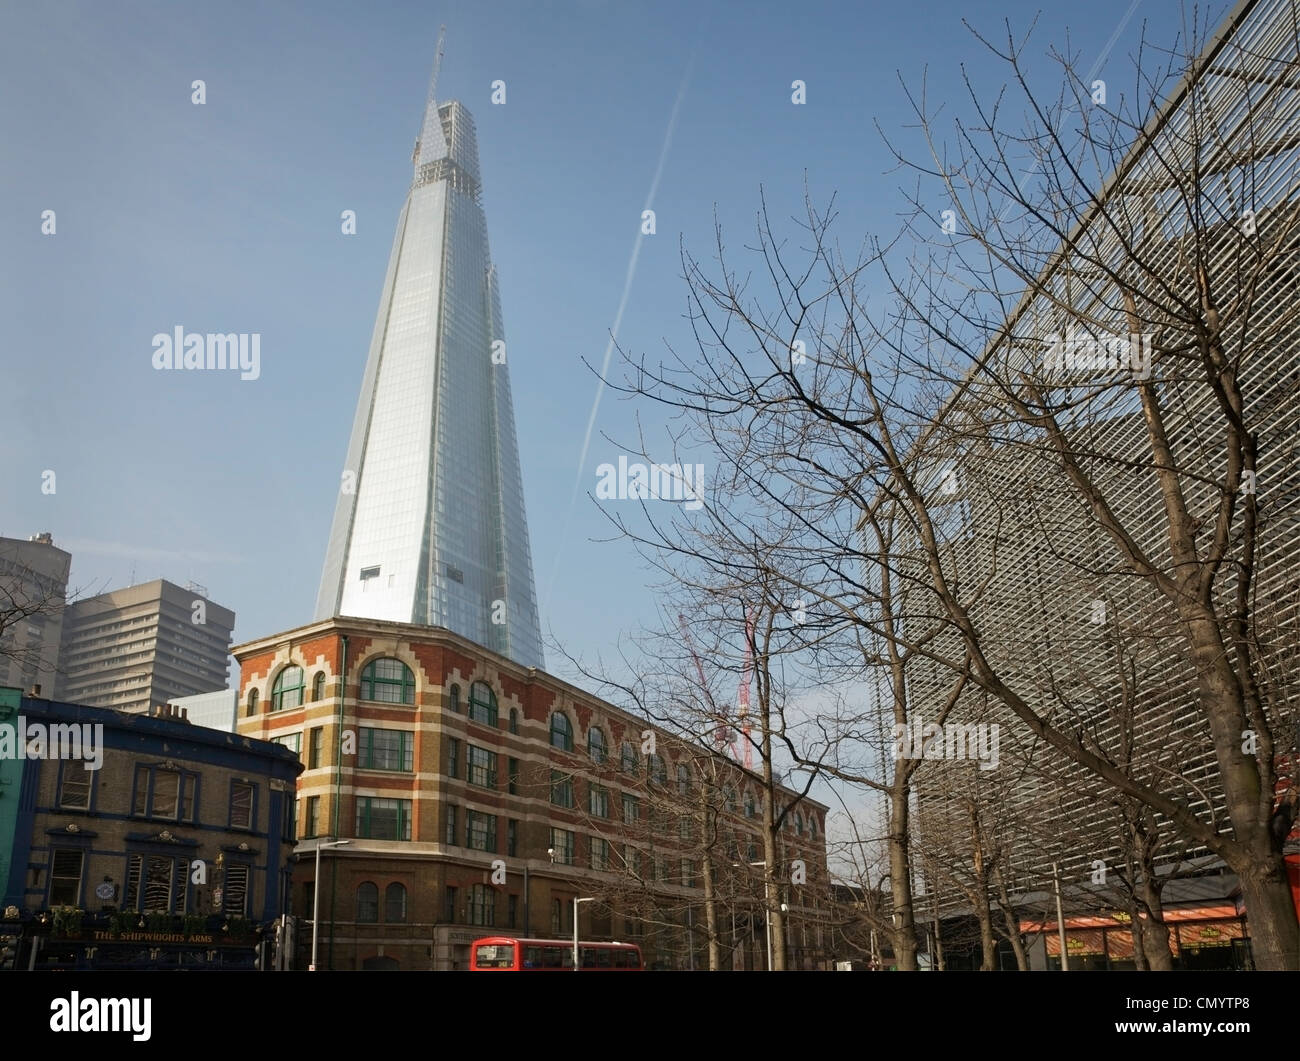 A London scene including Tooley Street and The Shard, London, UK. Stock Photo